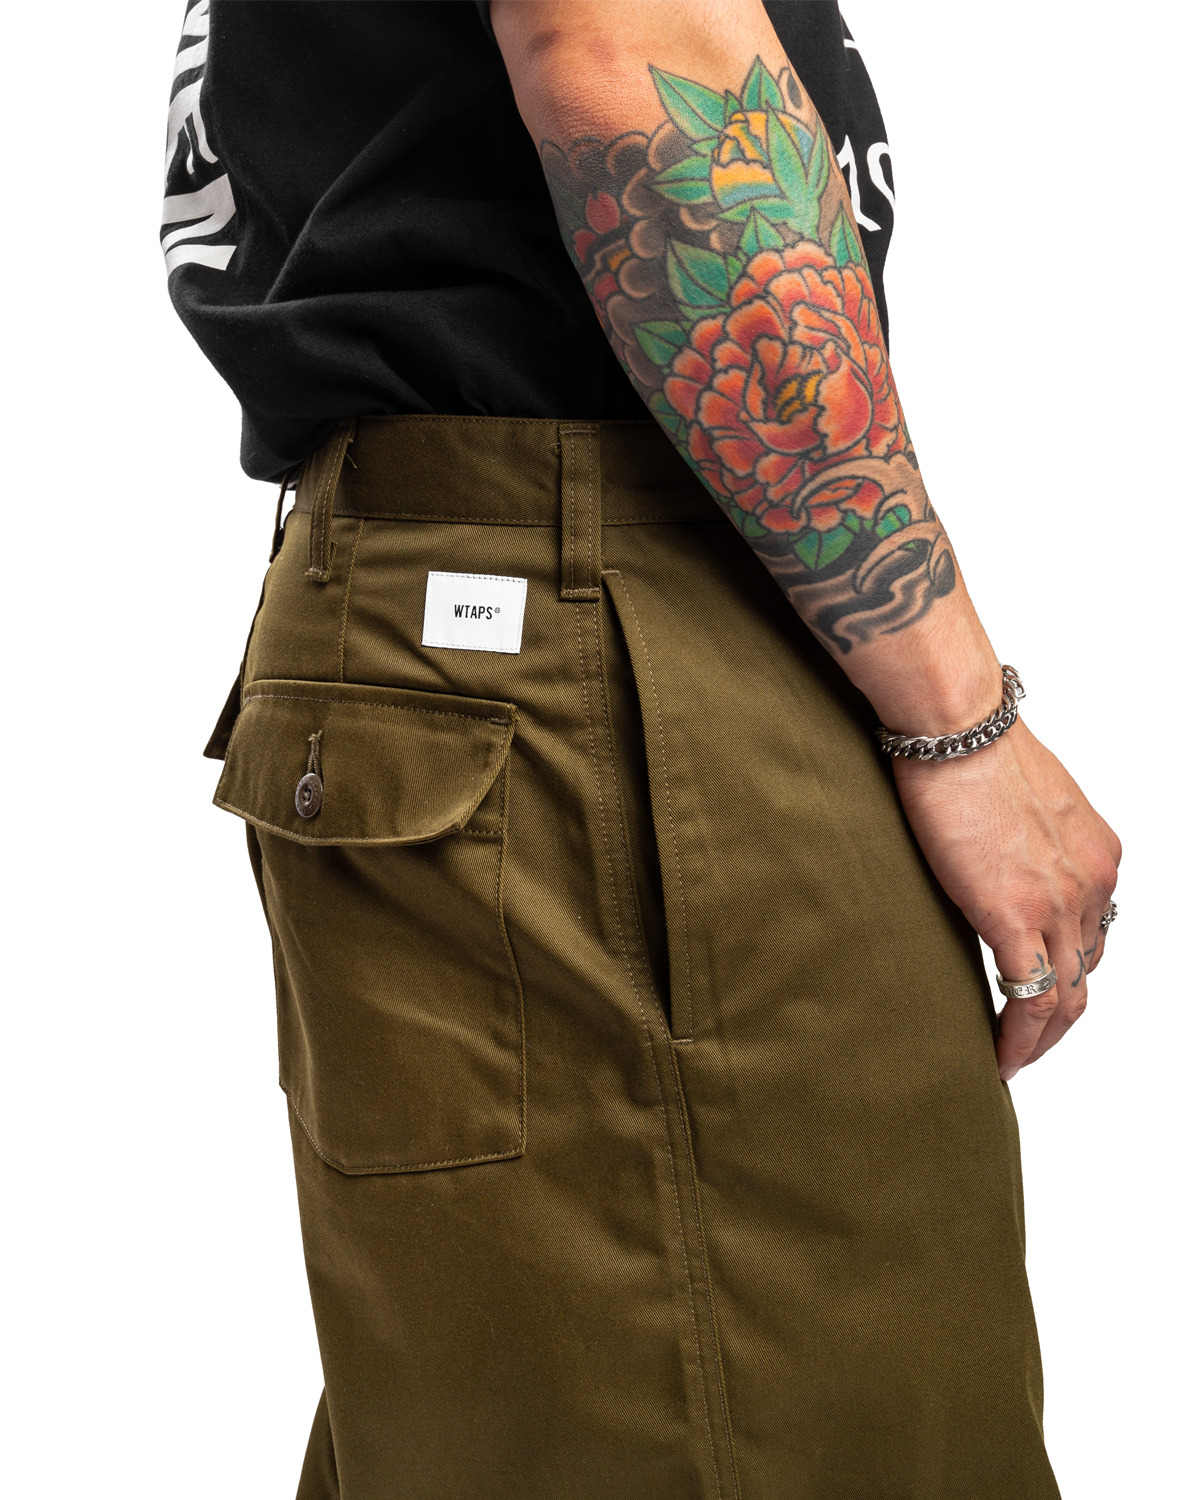 WTAPS Trousers 05 Olive Drab | REVERSIBLE